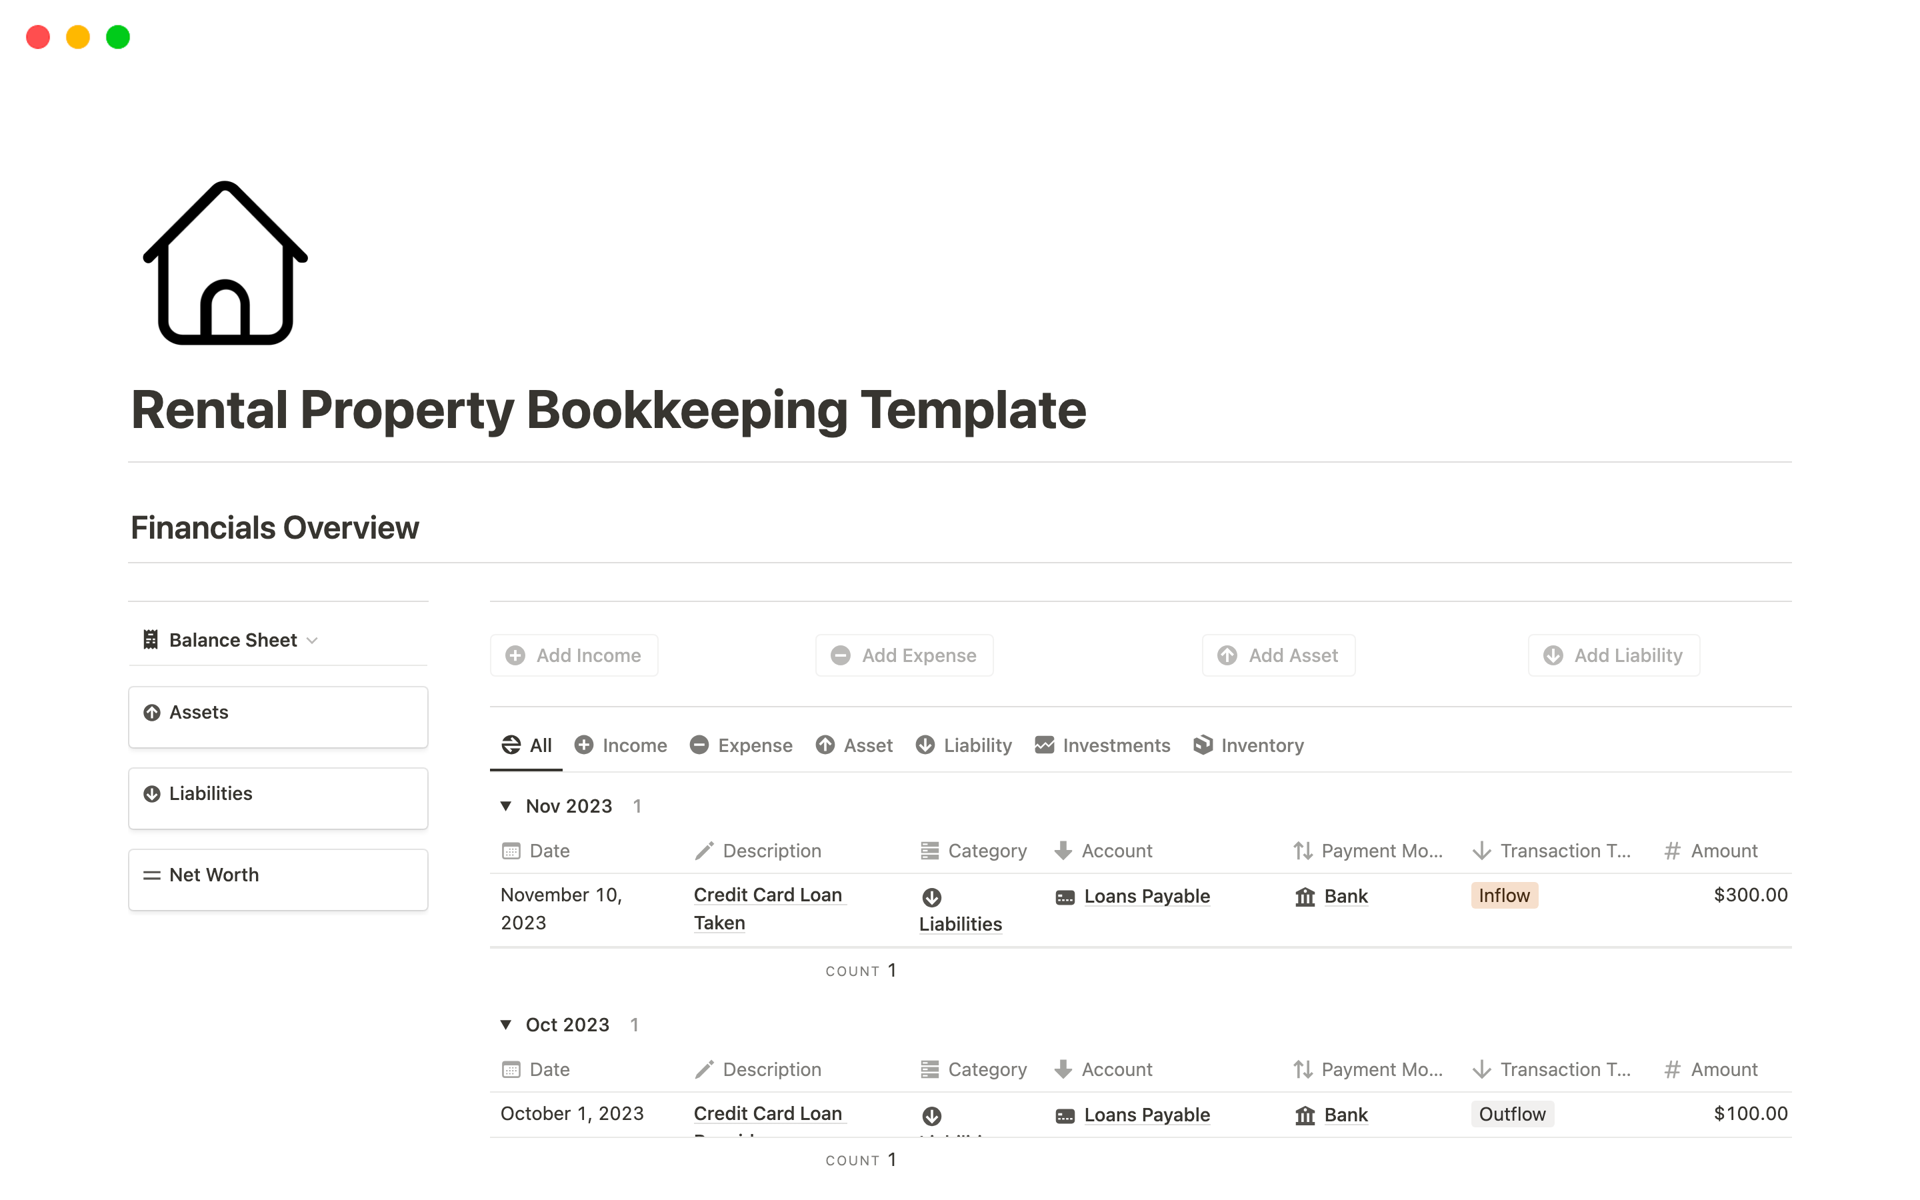 This bookkeeping template provides best solution for rental property owners to manage their business finances, produce income statement, balance sheet, cash flow statement and much more on a periodical basis.